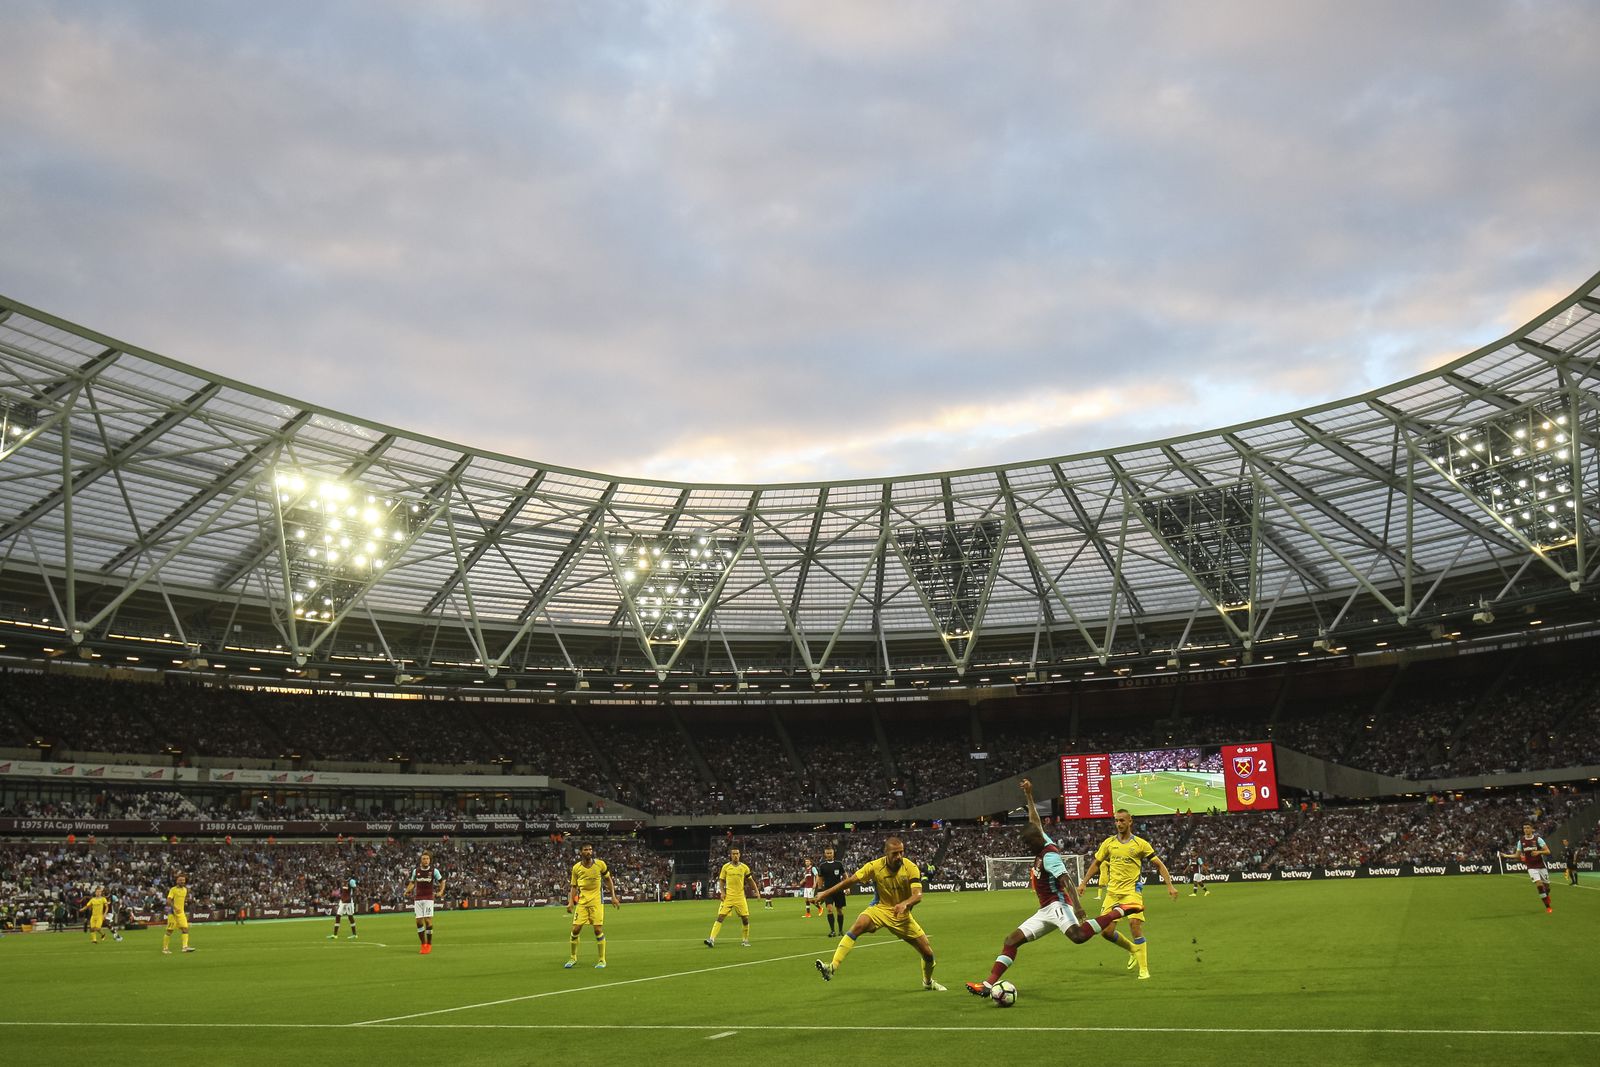 Back from the Euros, I ventured to the ~Olympic~ London Stadium for West Ham’s first match against Domzale. (24mm, ISO1250, 1/800th, f4)